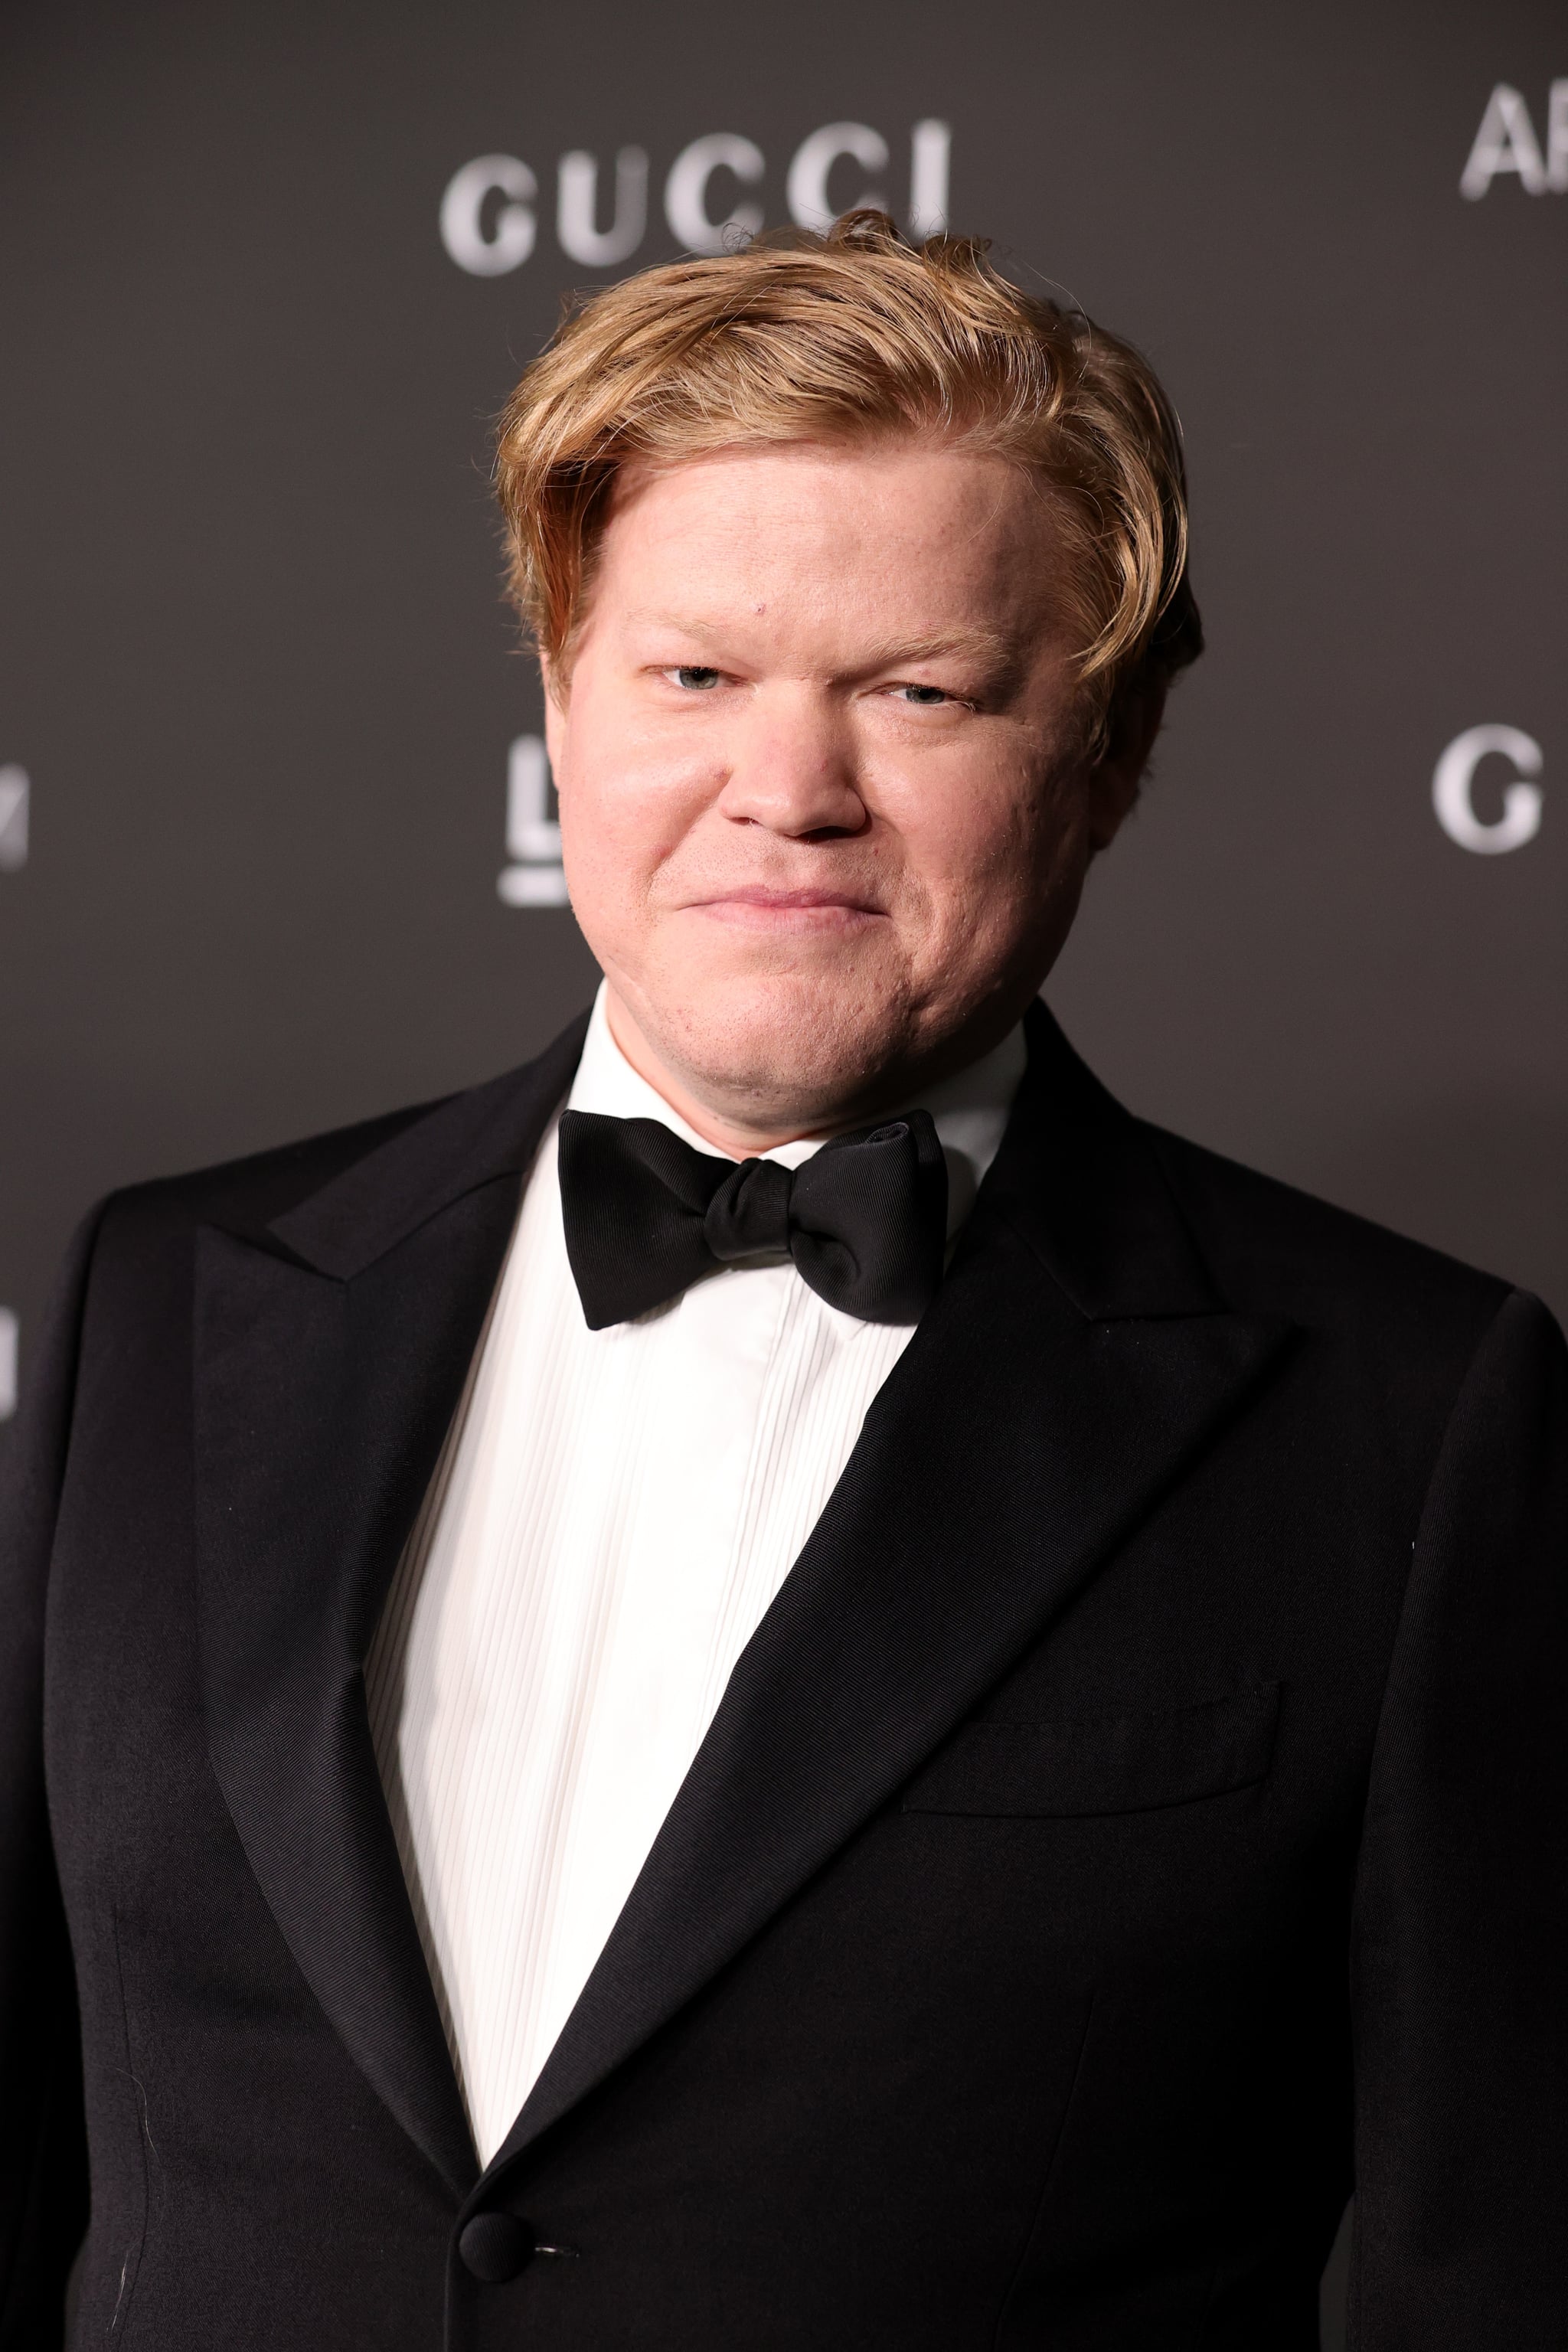 LOS ANGELES, CALIFORNIA - NOVEMBER 06: Jesse Plemons attends the 10th Annual LACMA ART+FILM GALA honoring Amy Sherald, Kehinde Wiley, and Steven Spielberg presented by Gucci at Los Angeles County Museum of Art on November 06, 2021 in Los Angeles, California. (Photo by Rich Fury/Getty Images for LACMA)